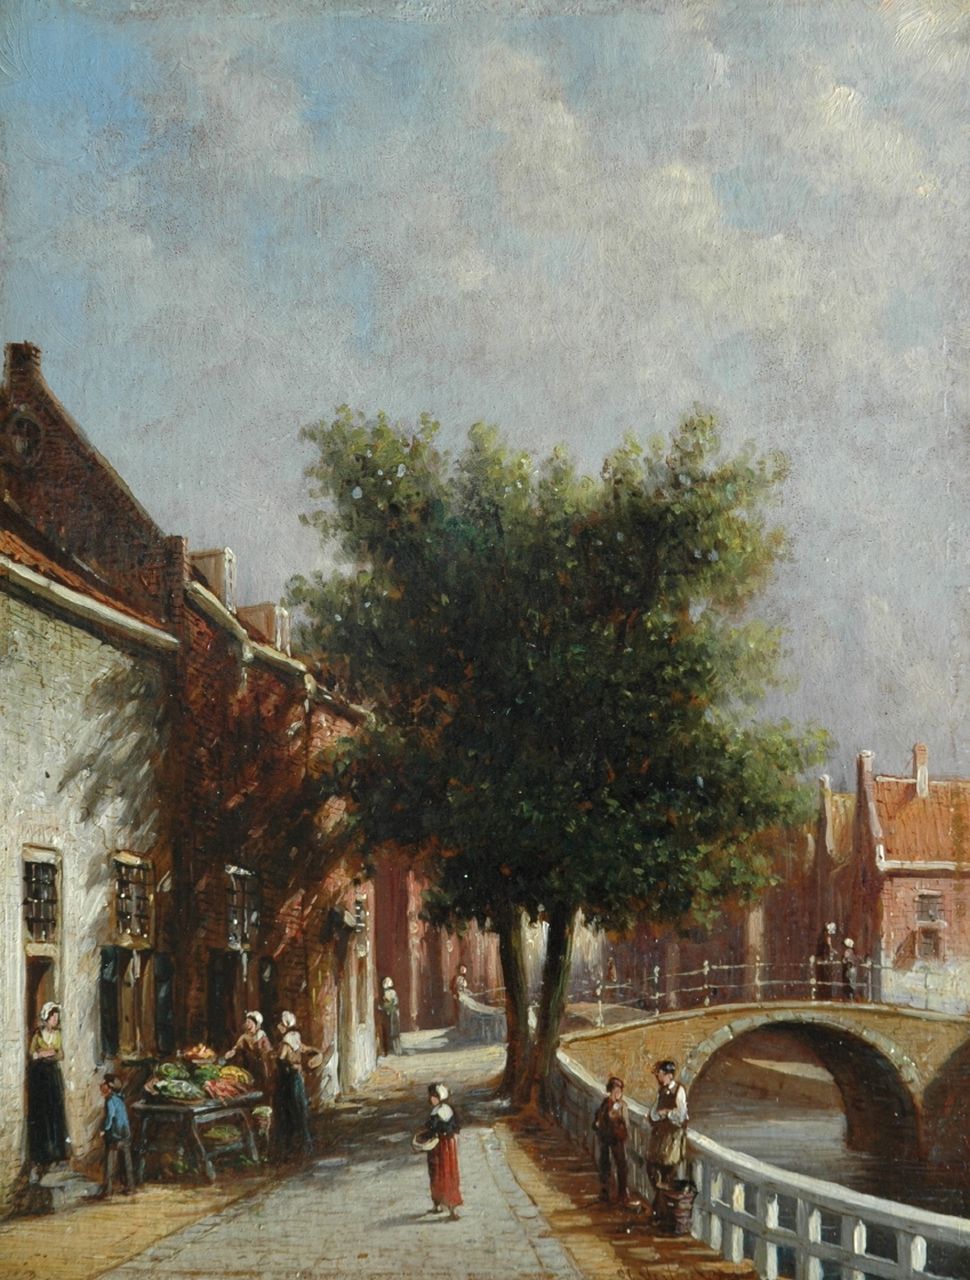 Vertin P.G.  | Petrus Gerardus Vertin, A town view with vegetable stall, Öl auf Holz 25,0 x 19,0 cm, signed r.c.